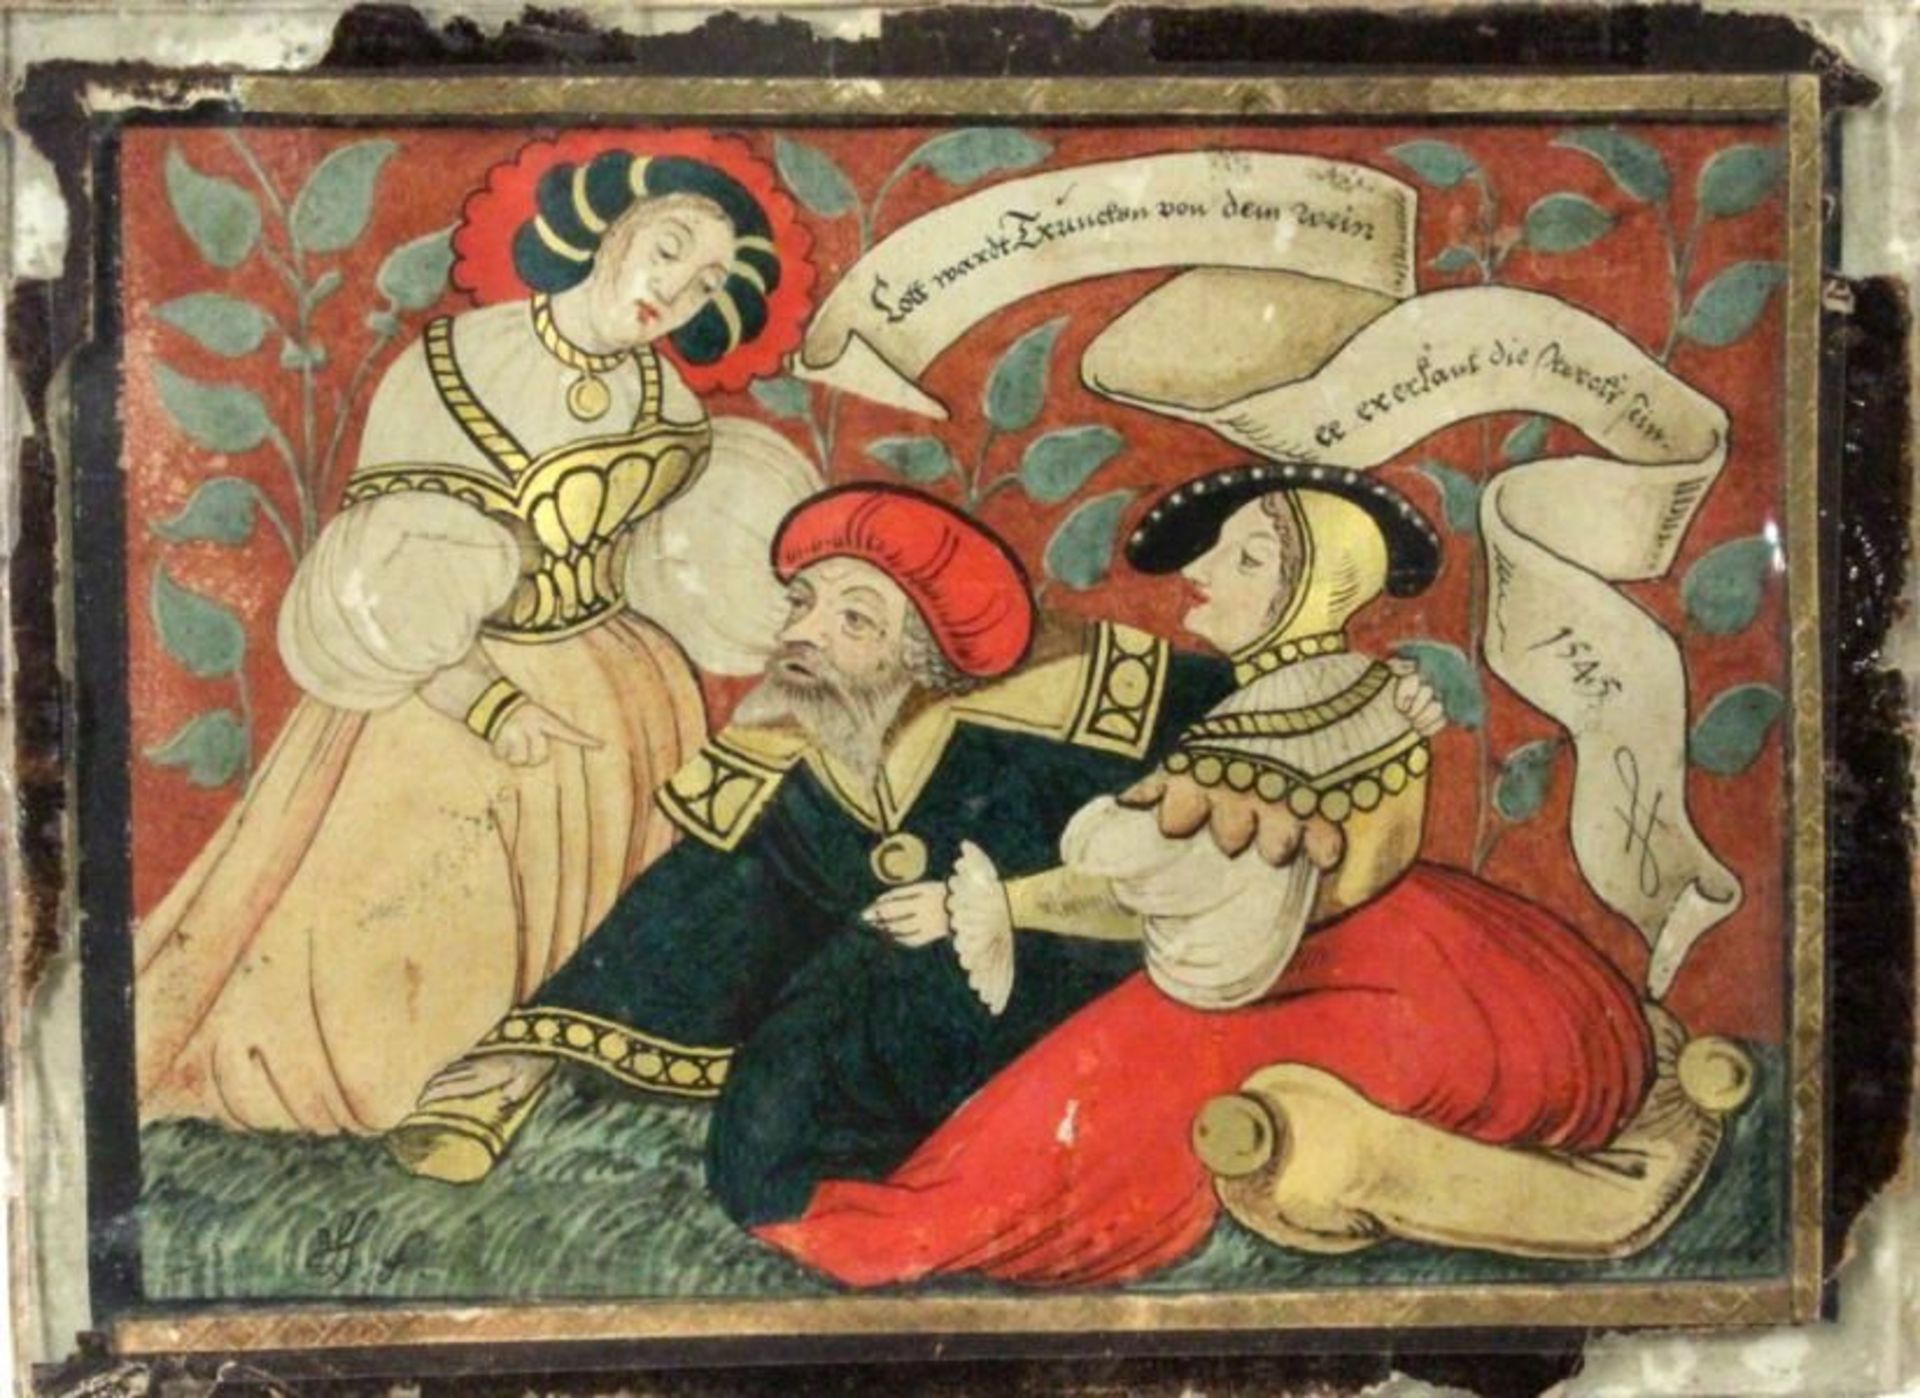 A RENAISSANCE MINIATURE A drunk prince with two ladies; illustration with inscription and date: